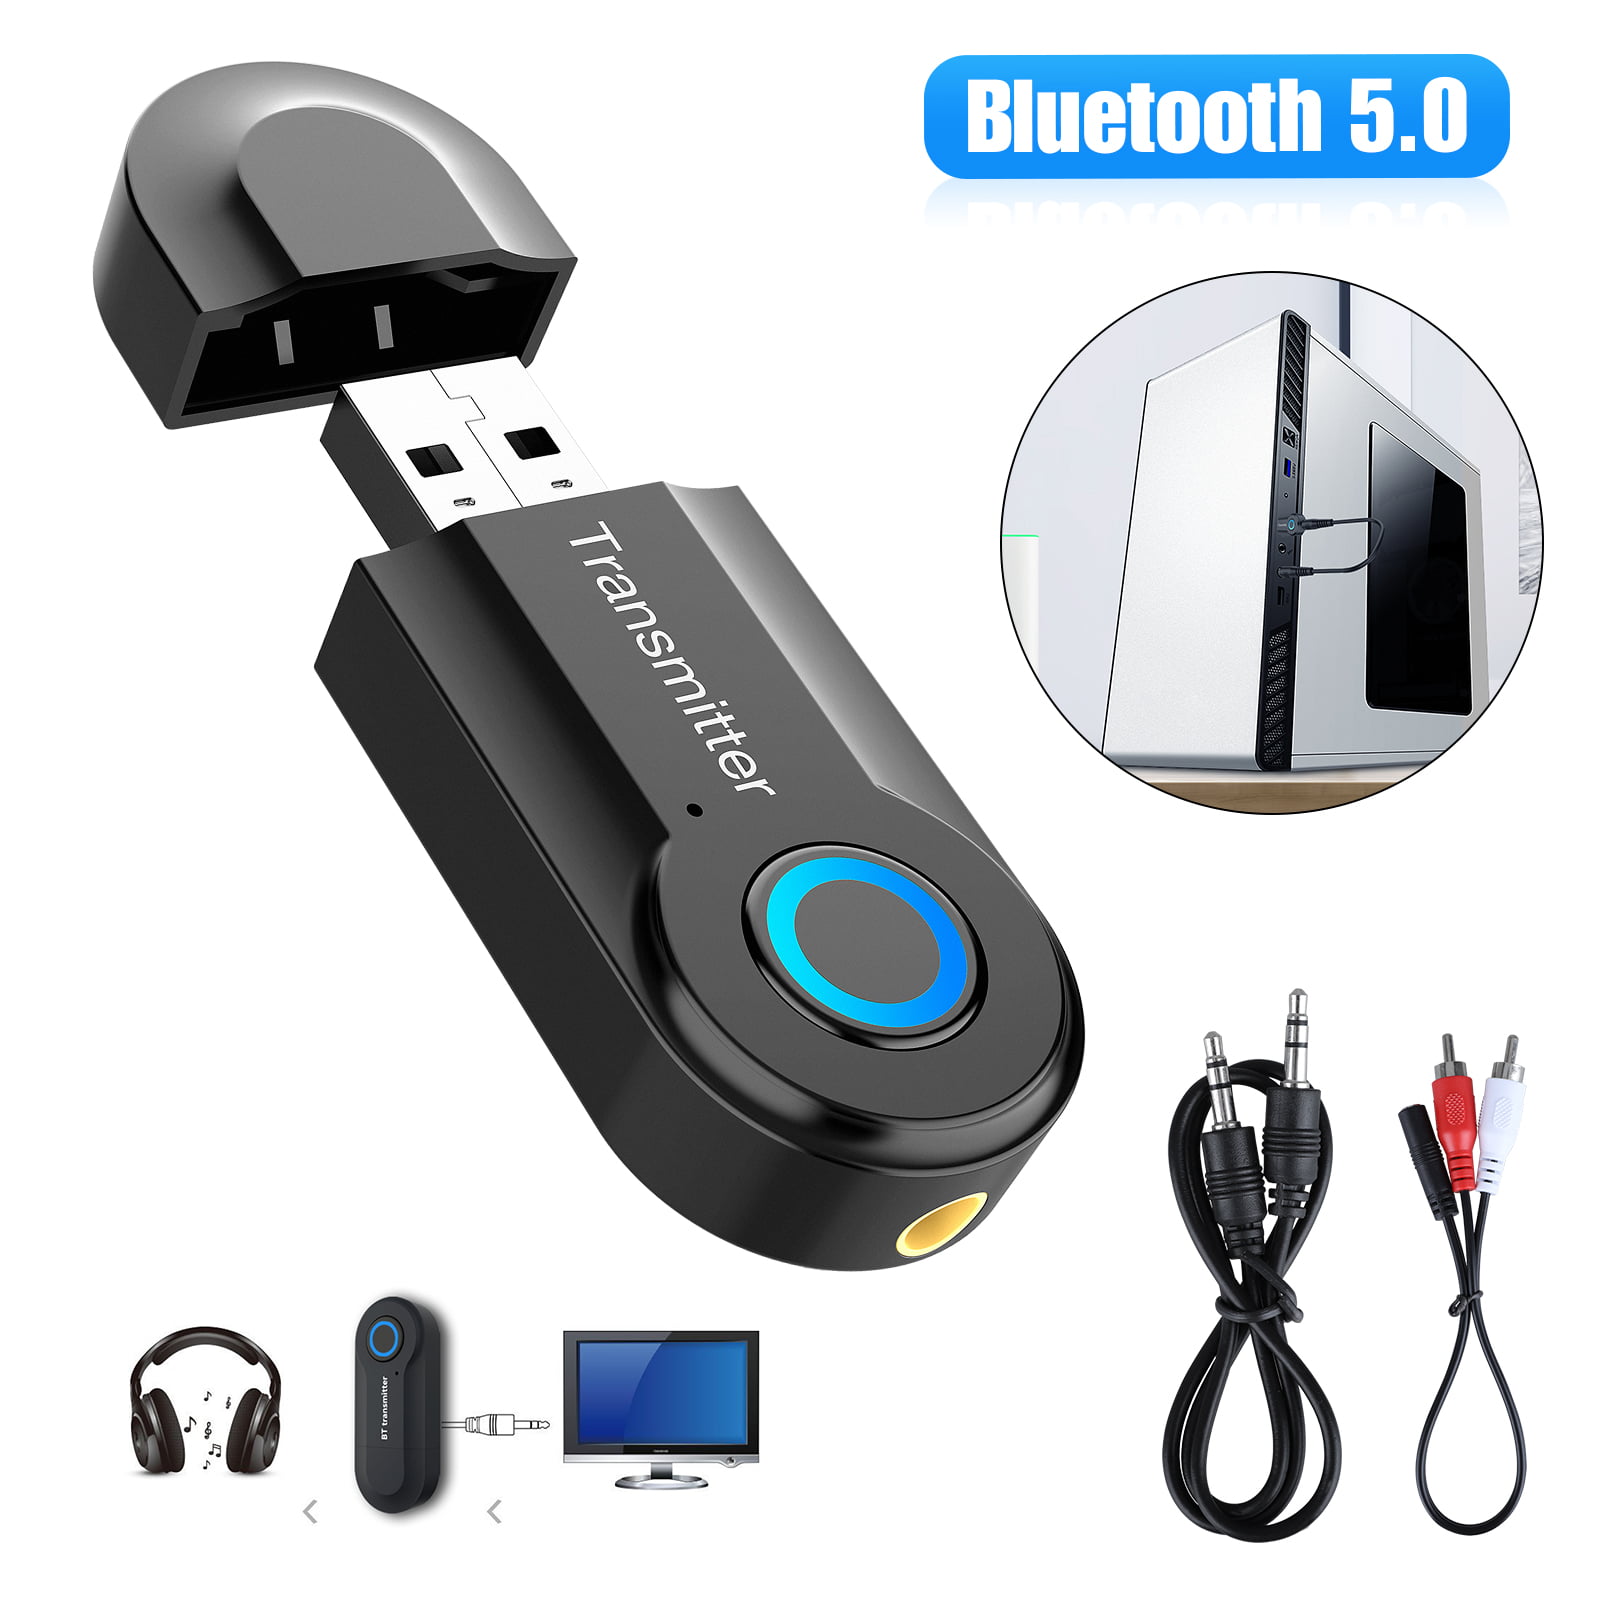 Bluetooth Adapter Audio,AUX Bluetooth Adapter 5.0 Bluetooth Empfänger Transmitter 2 in 1 Audio Adapter mit Aux 3.5 mm RCA TV Bluetooth Sender Empfänger 5.0 für PC,TV,Smartphone,Tablet 